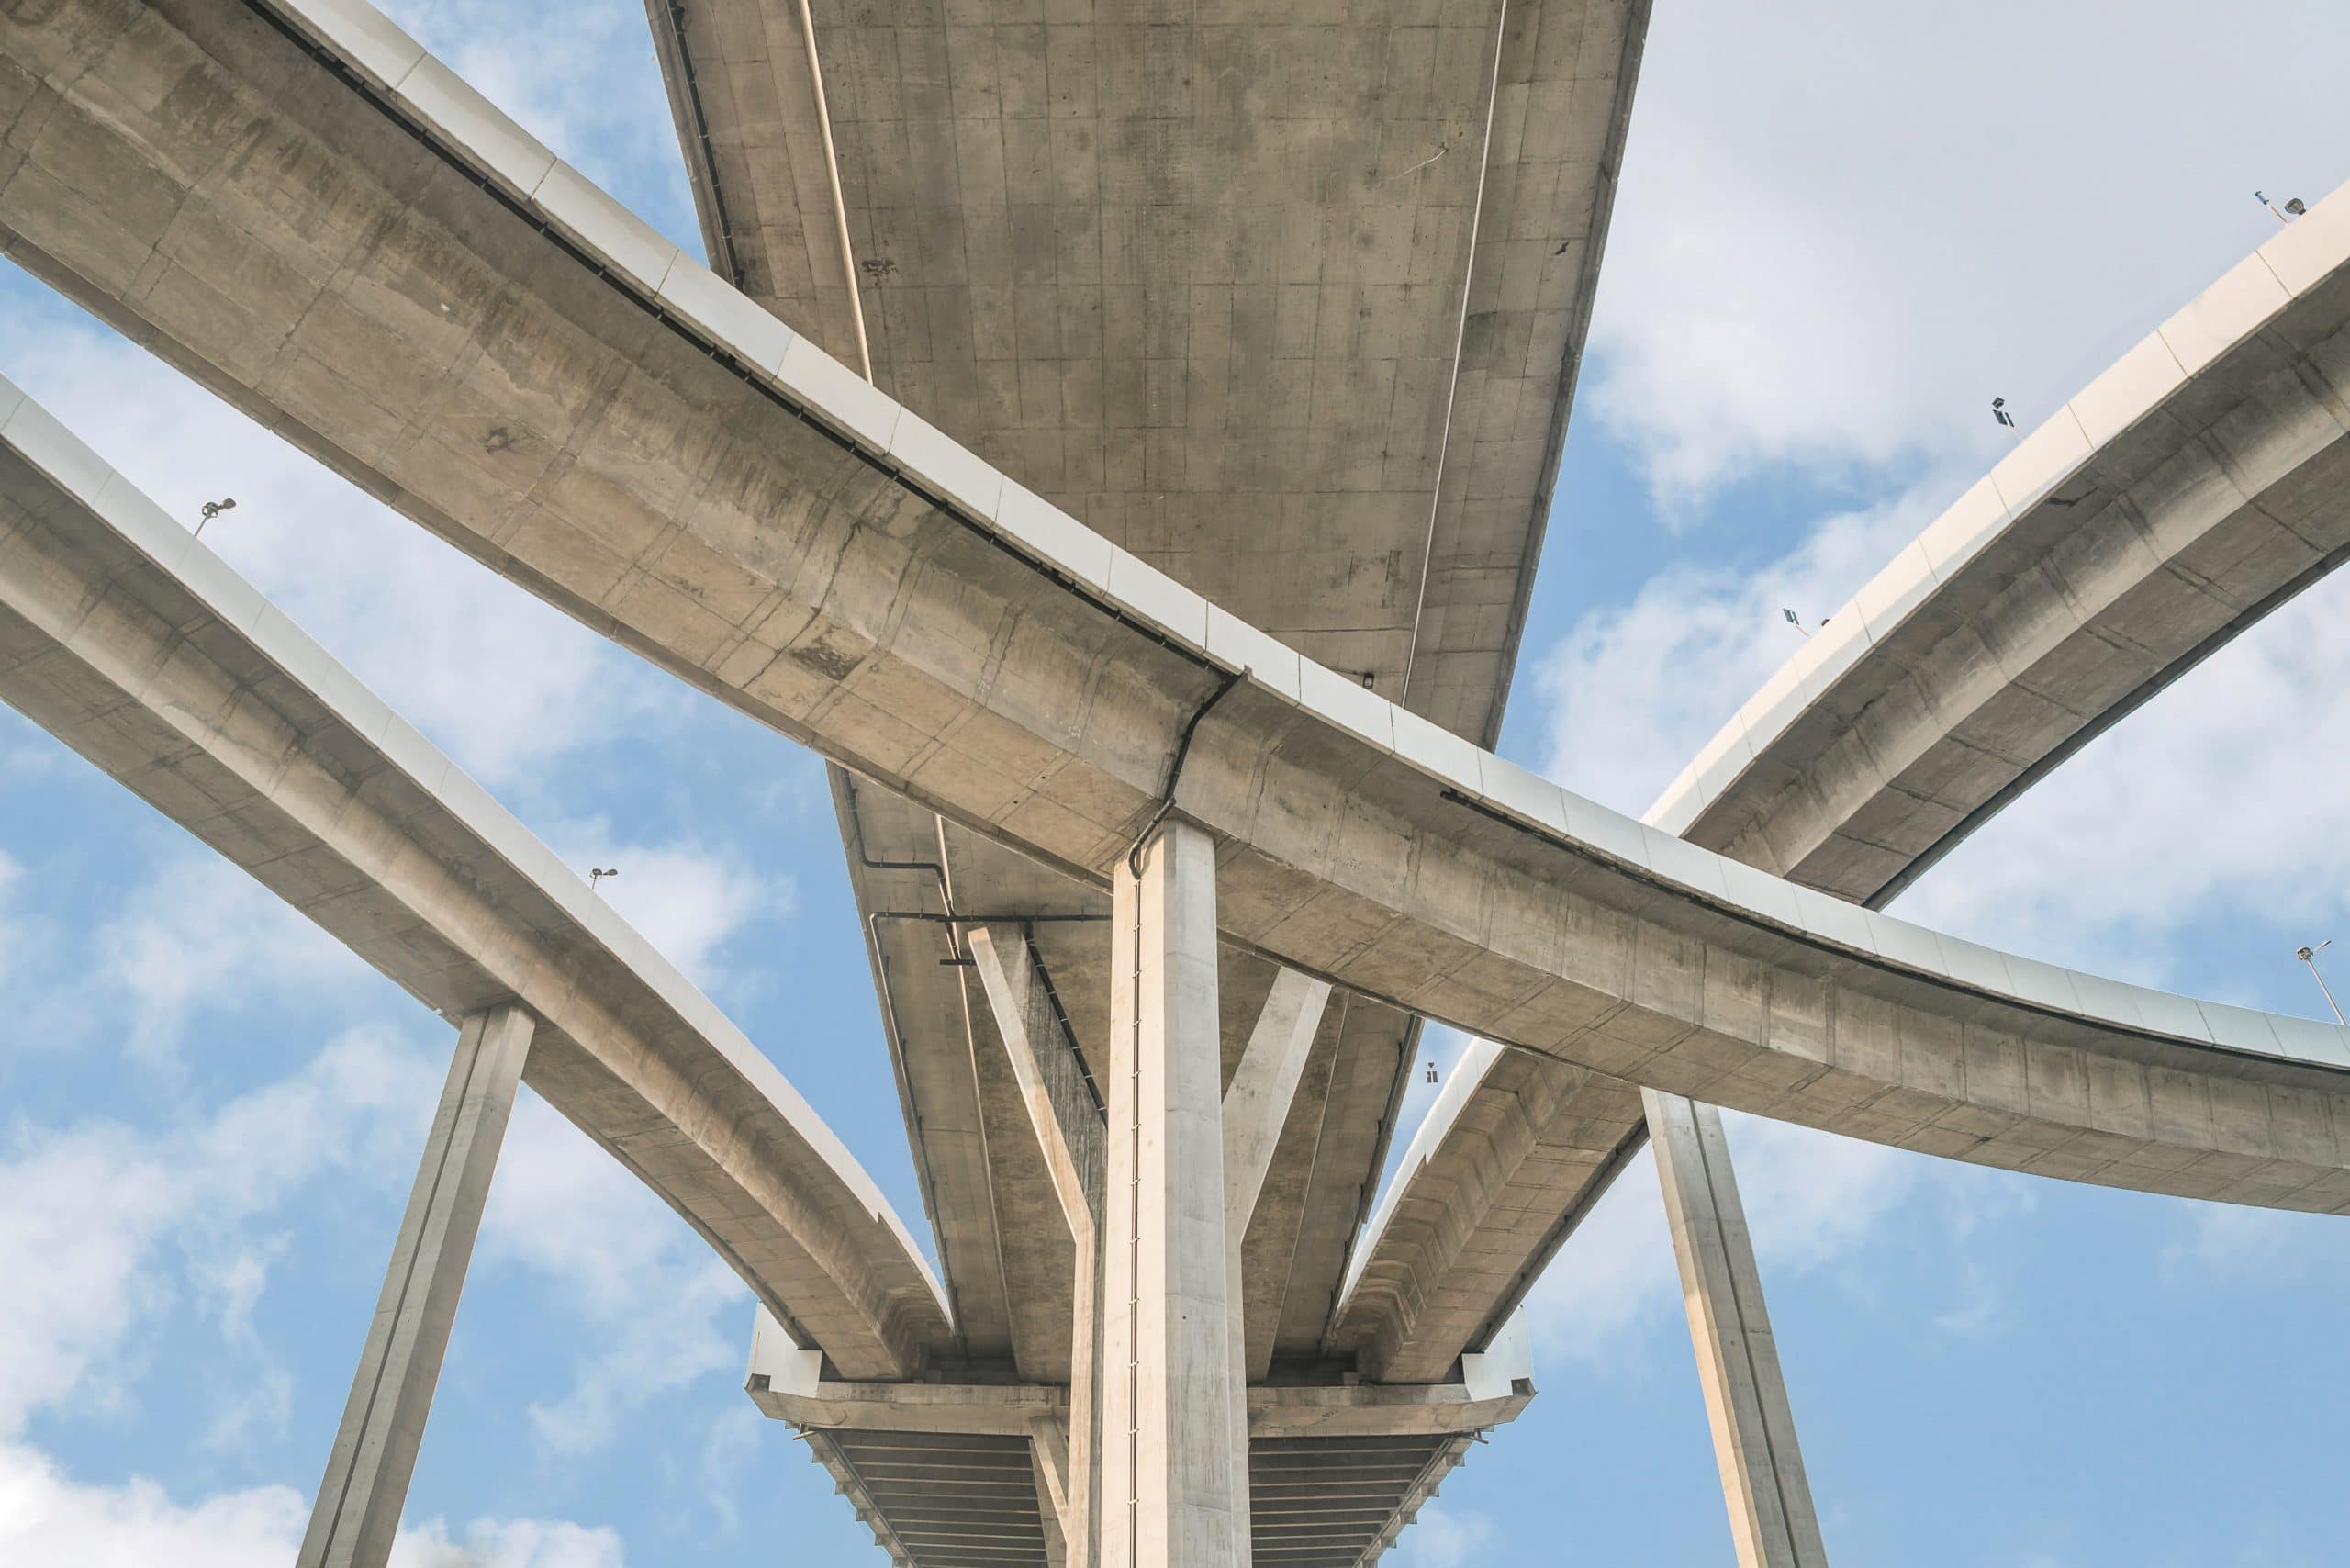 What Is One Advantage Of Reinforced-Concrete Construction?